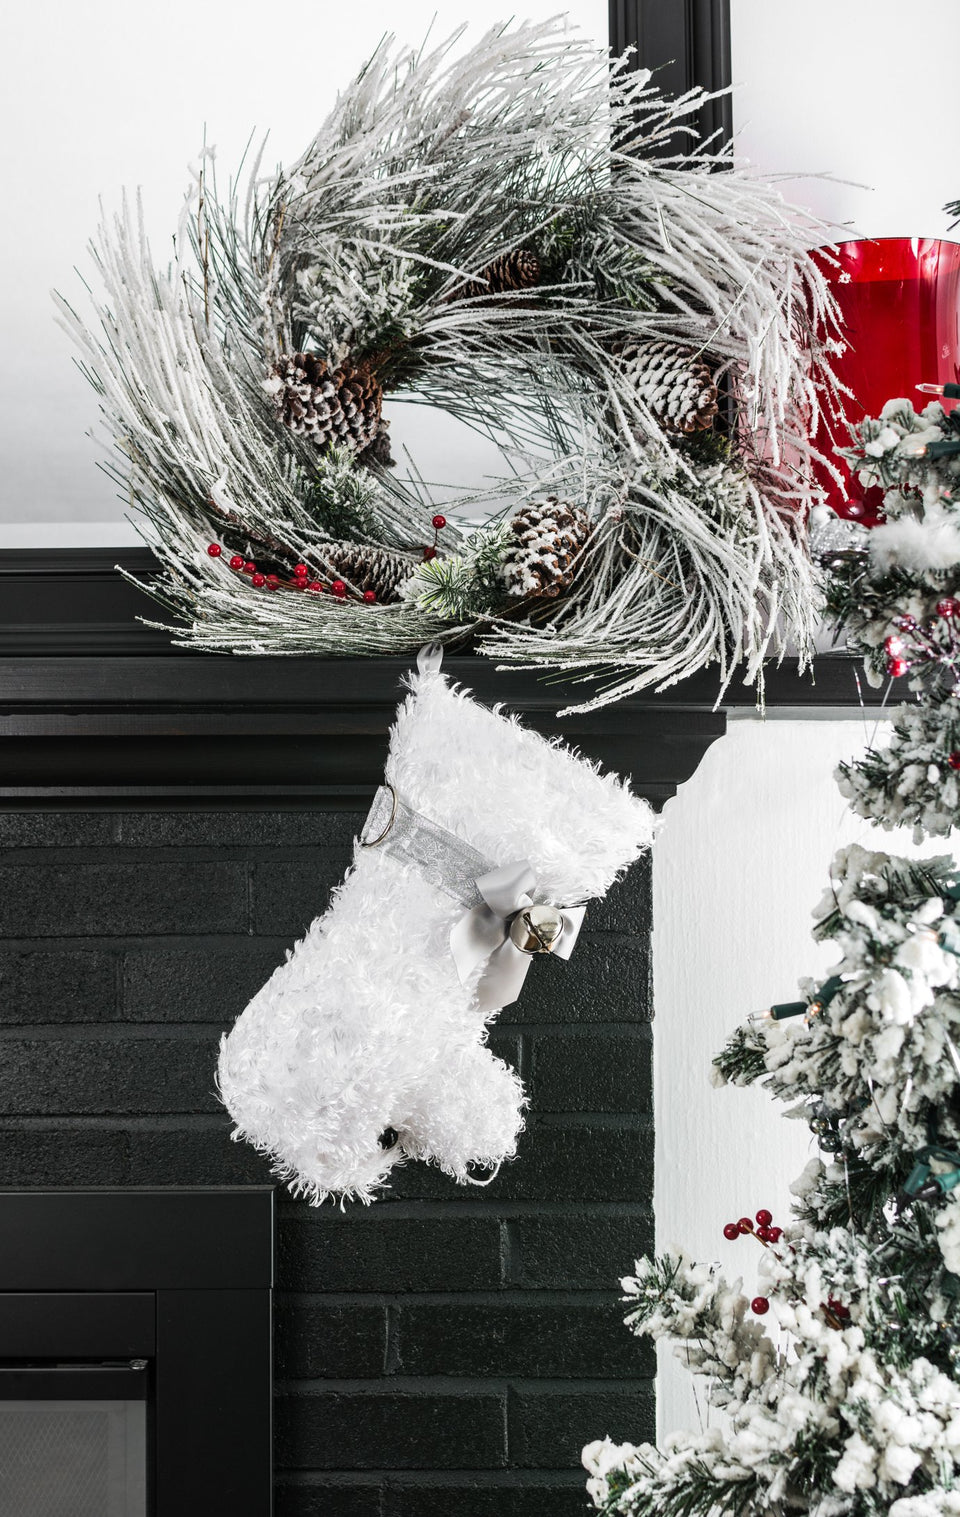 This Snowball dog Christmas stocking is inspired by the Maltese and Bichon Frise and is the perfect gift for stuffing toys and treats into to spoil your fur baby for Christmas, or whatever holiday you celebrate!